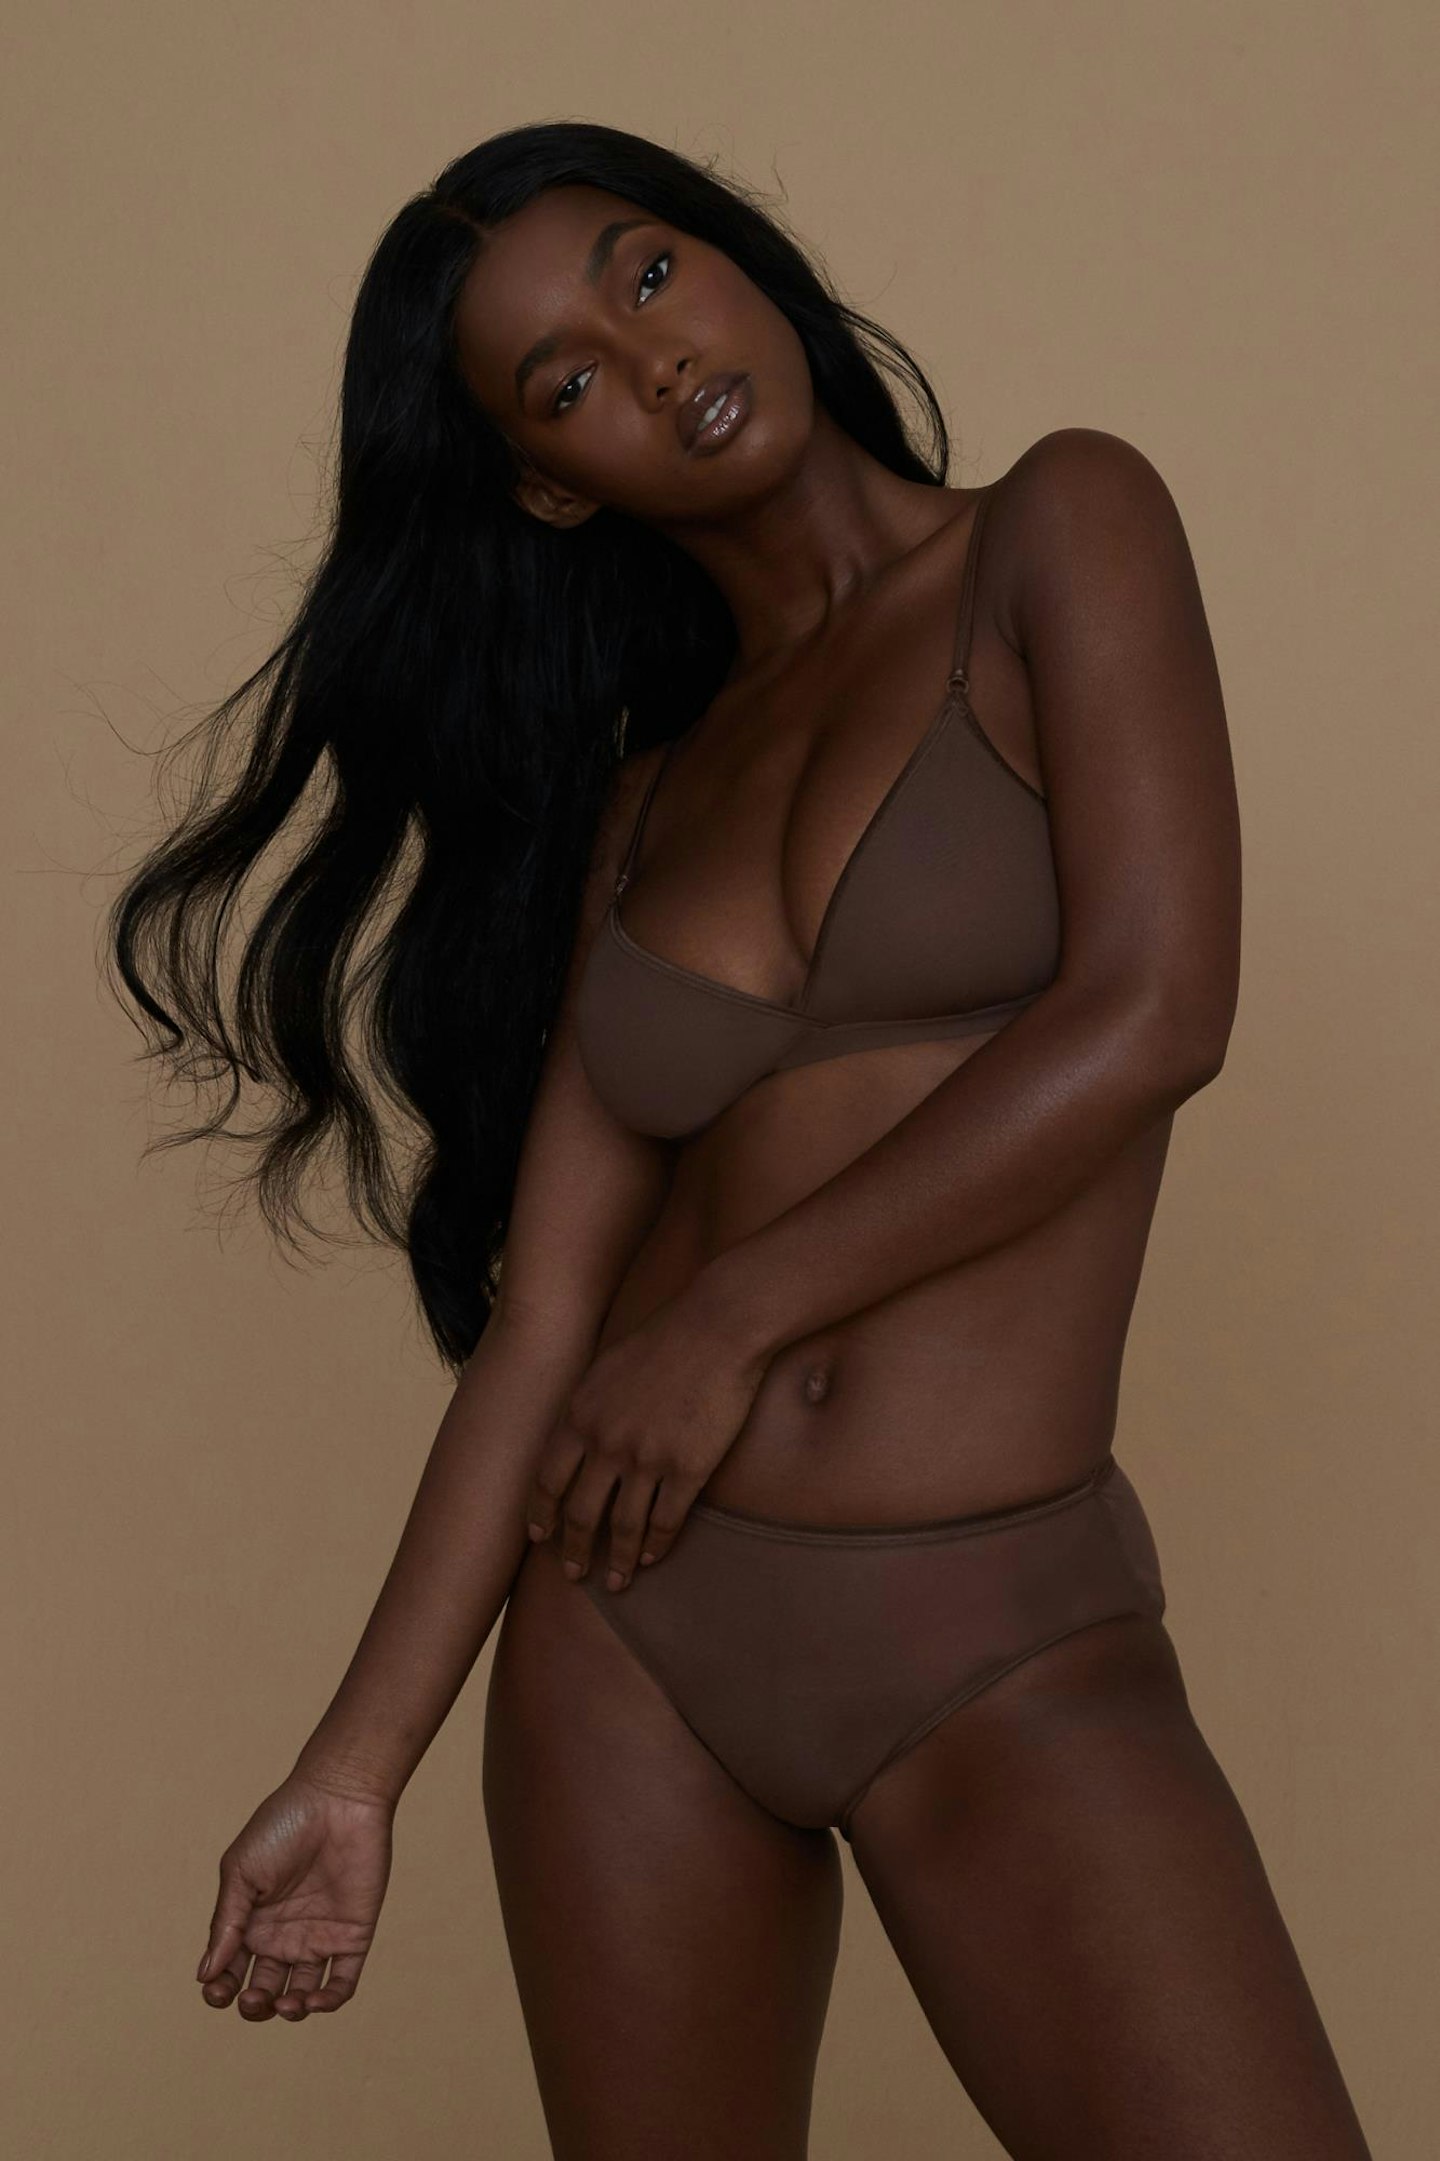 Shop our Panties - Nude Lingerie for Women of Color - Nubian Skin